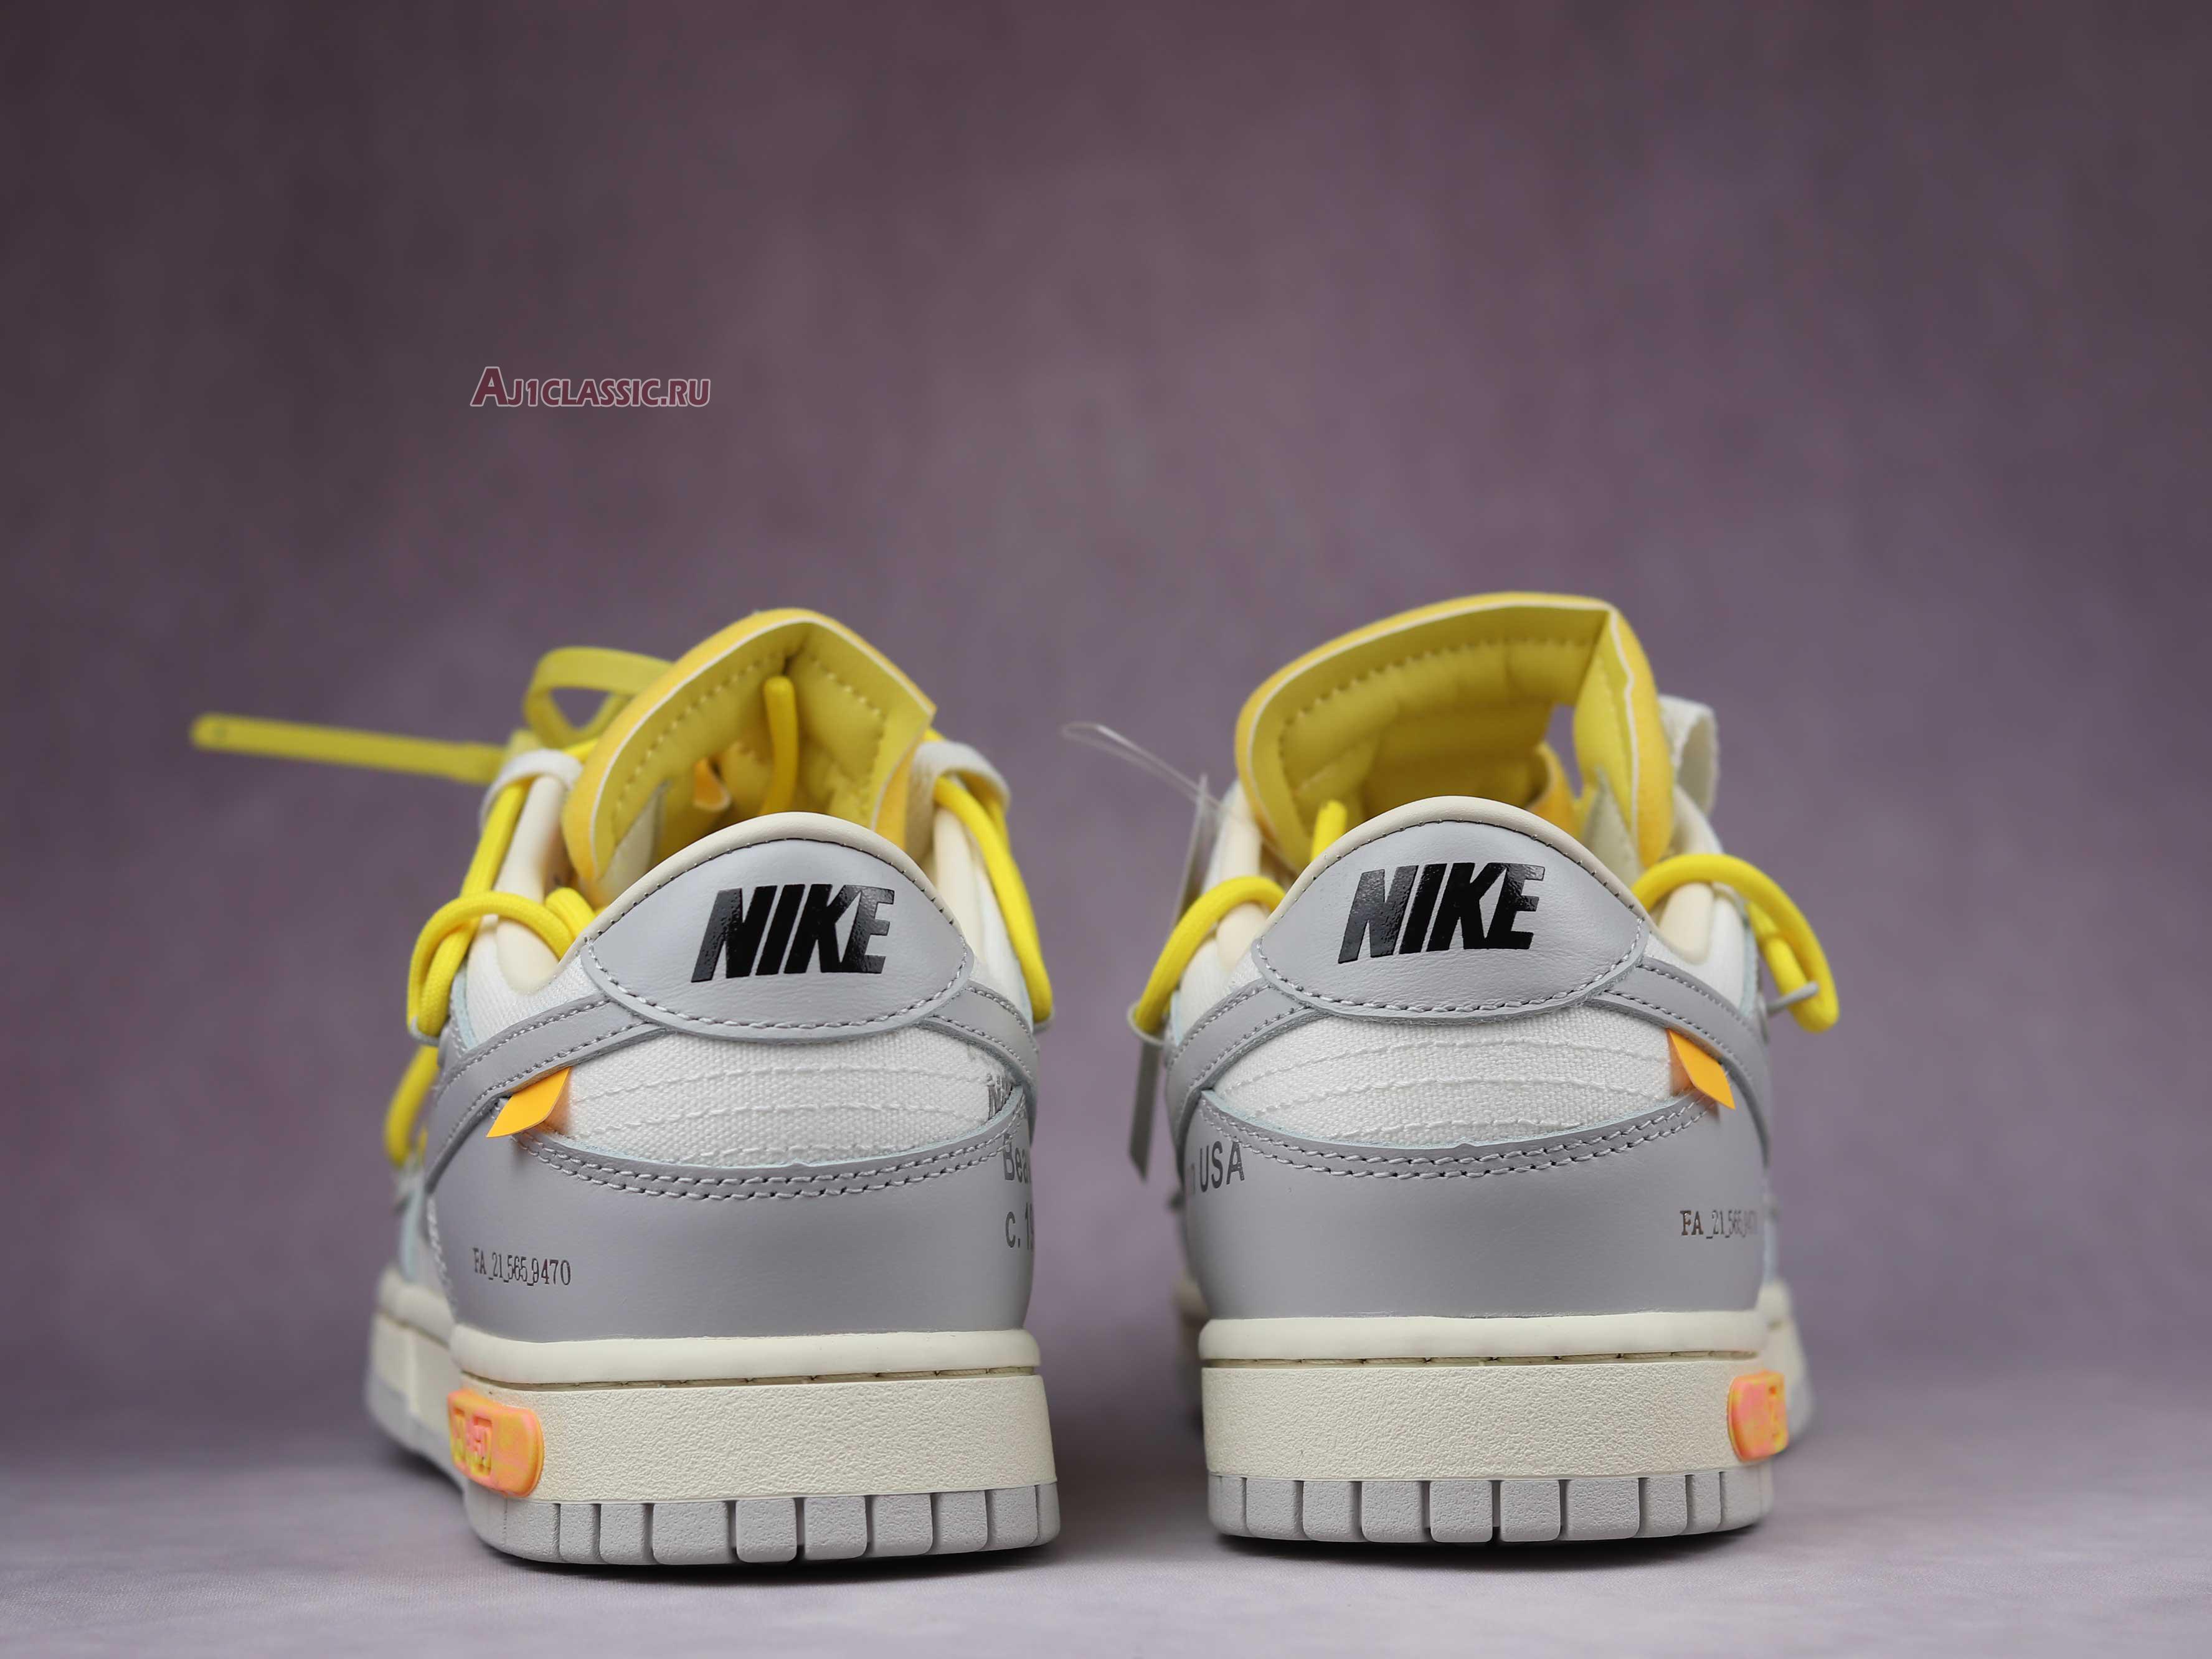 Off-White x Nike Dunk Low "Lot 29 of 50" DM1602-103